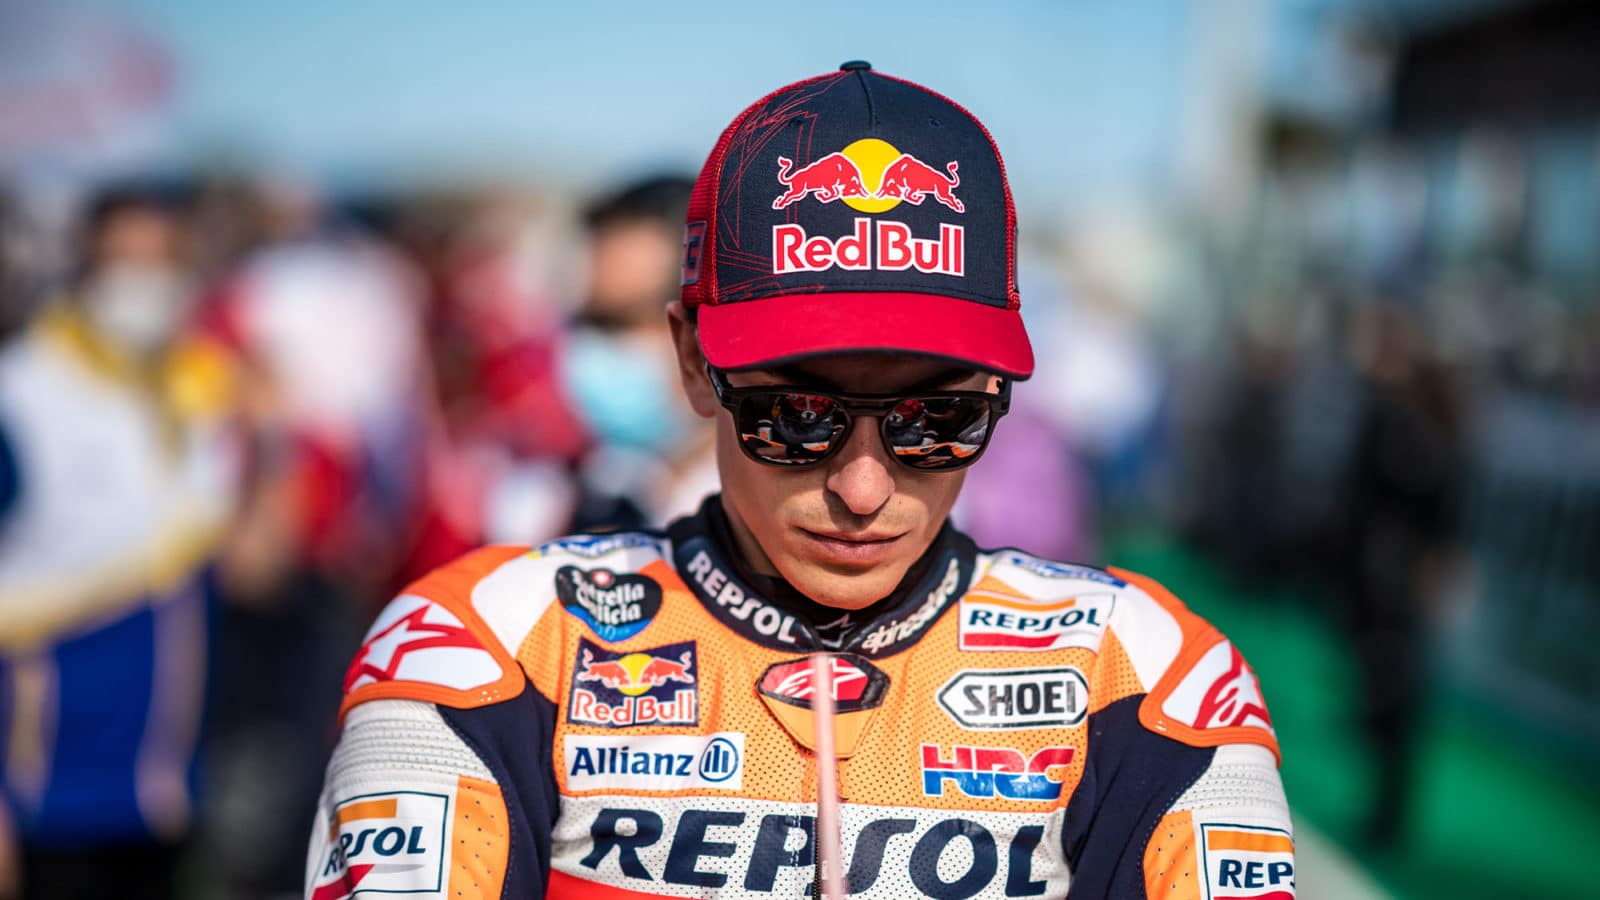 MISANO ADRIATICO, ITALY - OCTOBER 24: Marc Marquez of Spain and Repsol Honda Team prepares during the race of the MotoGP Gran Premio Nolan del Made in Italy e dell'Emilia-Romagna at Misano World Circuit on October 24, 2021 in Misano Adriatico, Italy. (Photo by Steve Wobser/Getty Images)